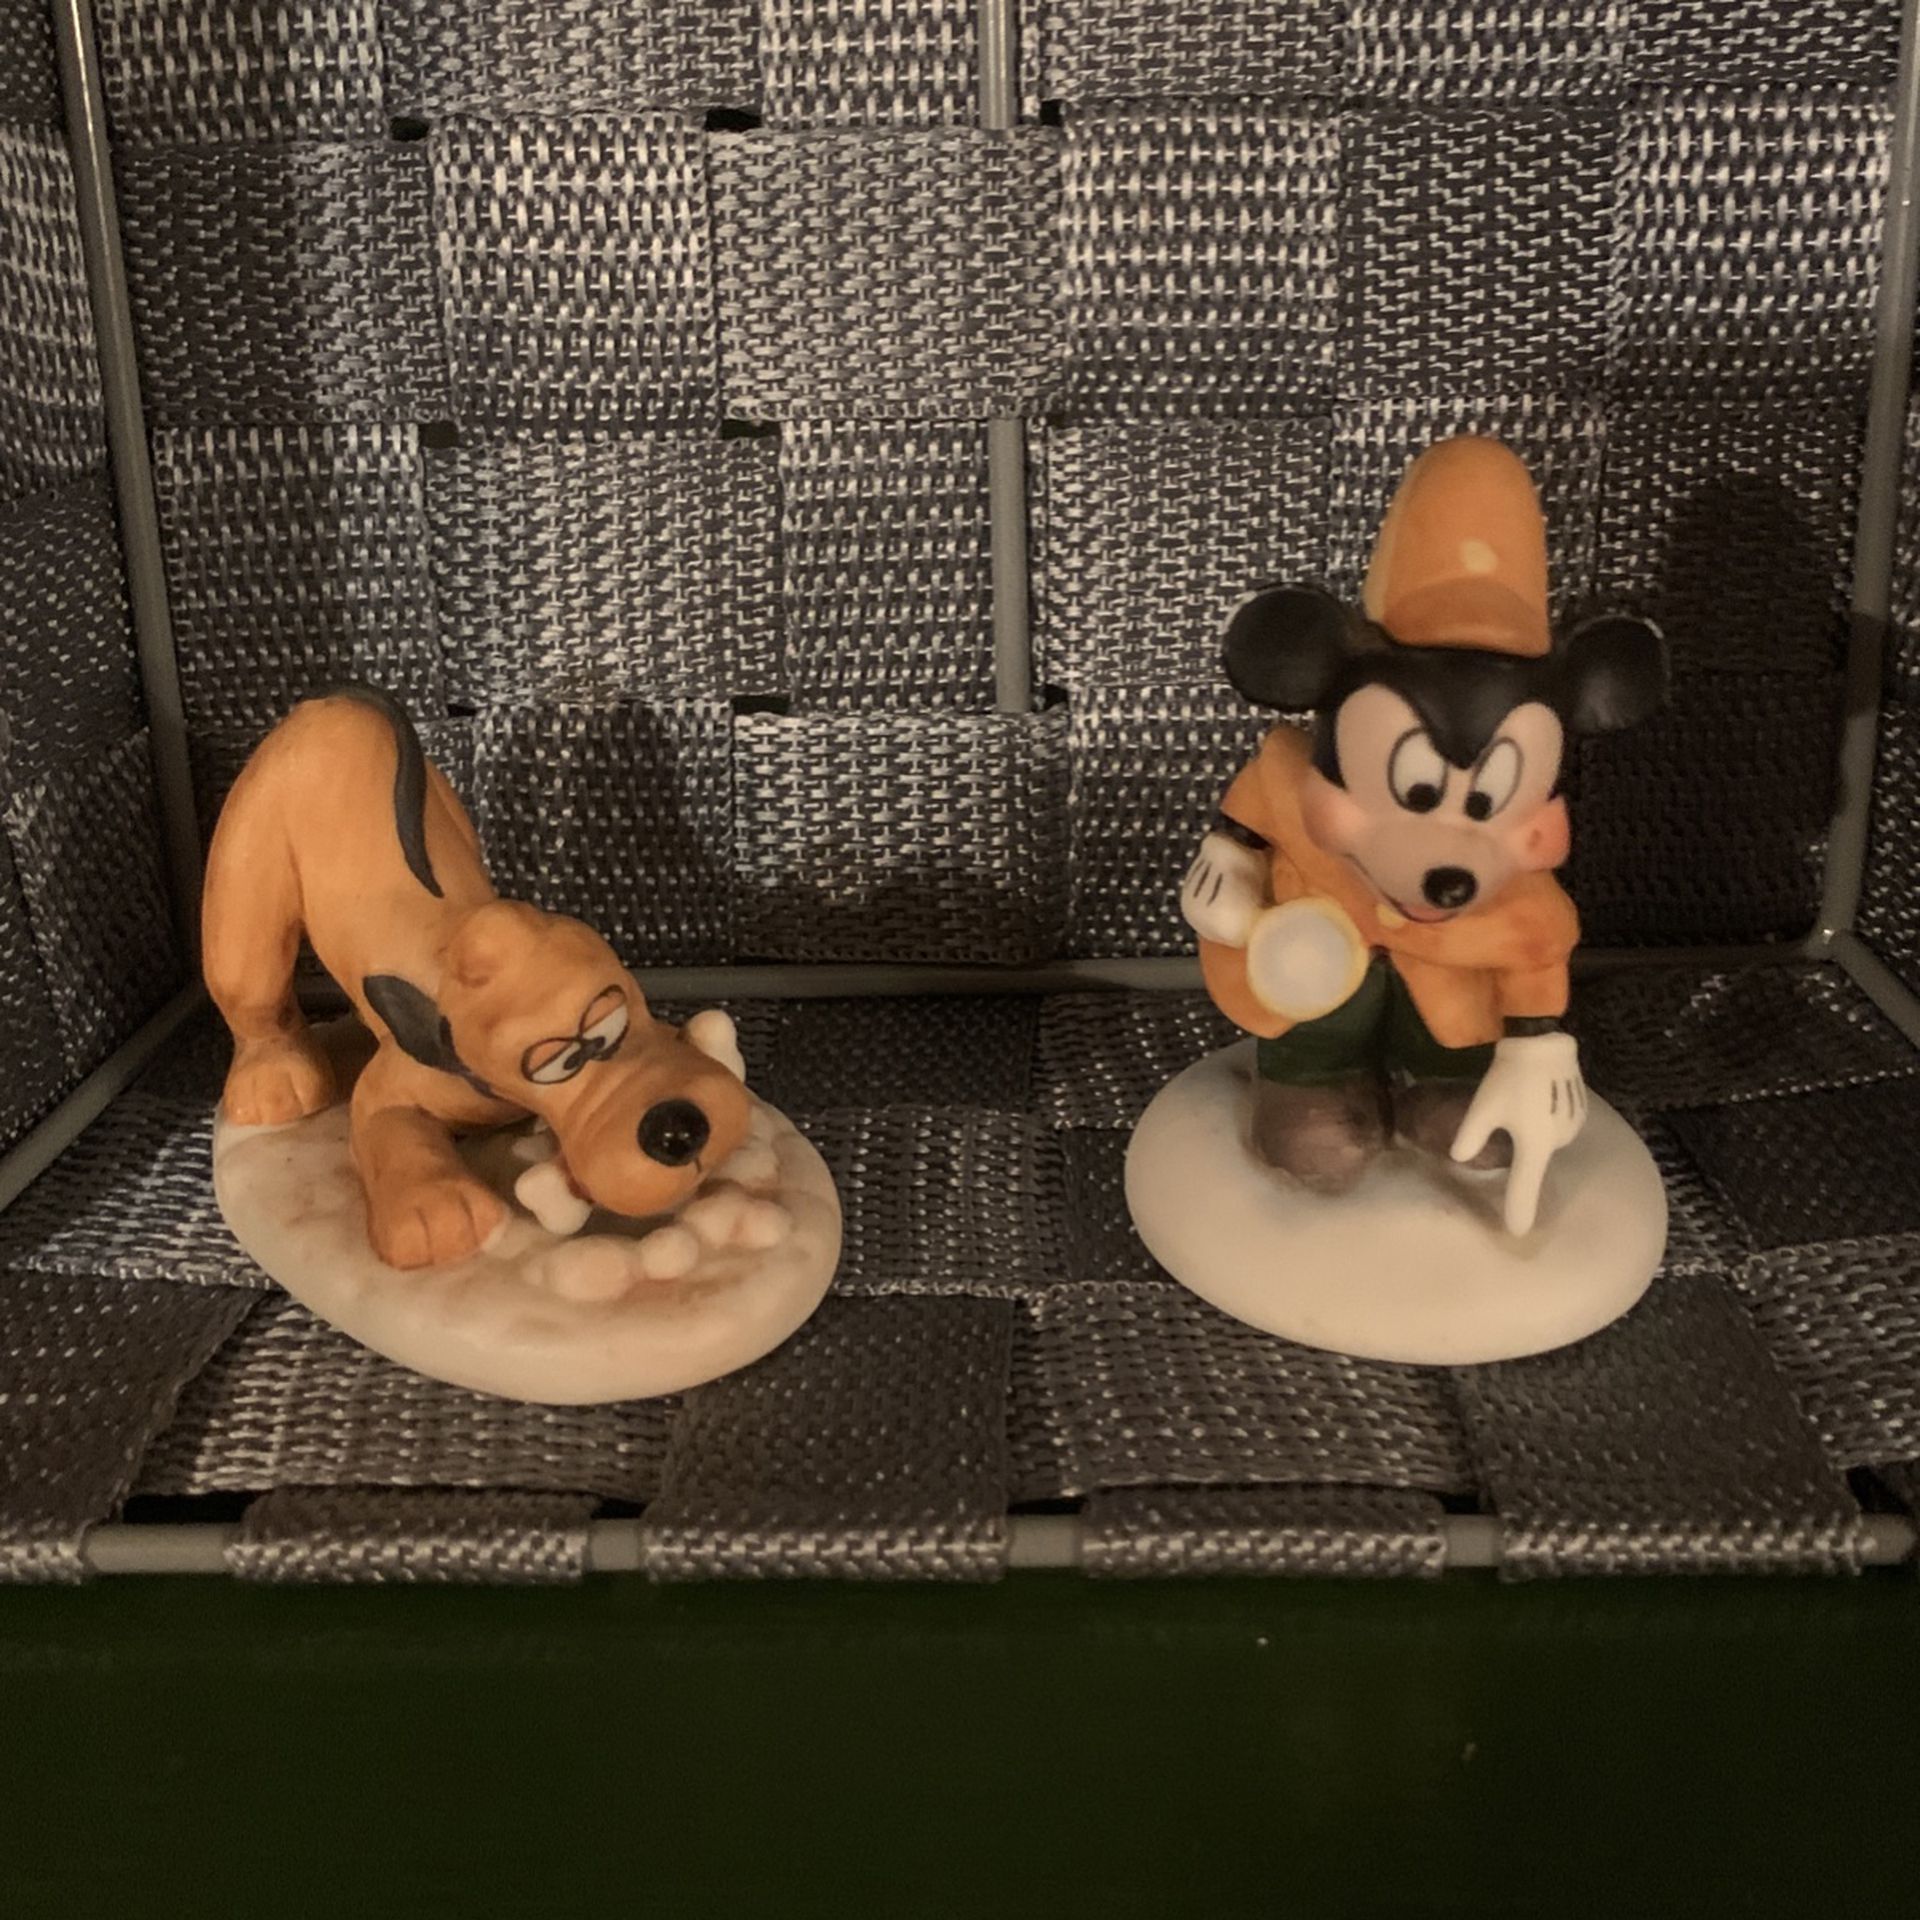 1987 DETECTIVE MICKEY AND PLUTO